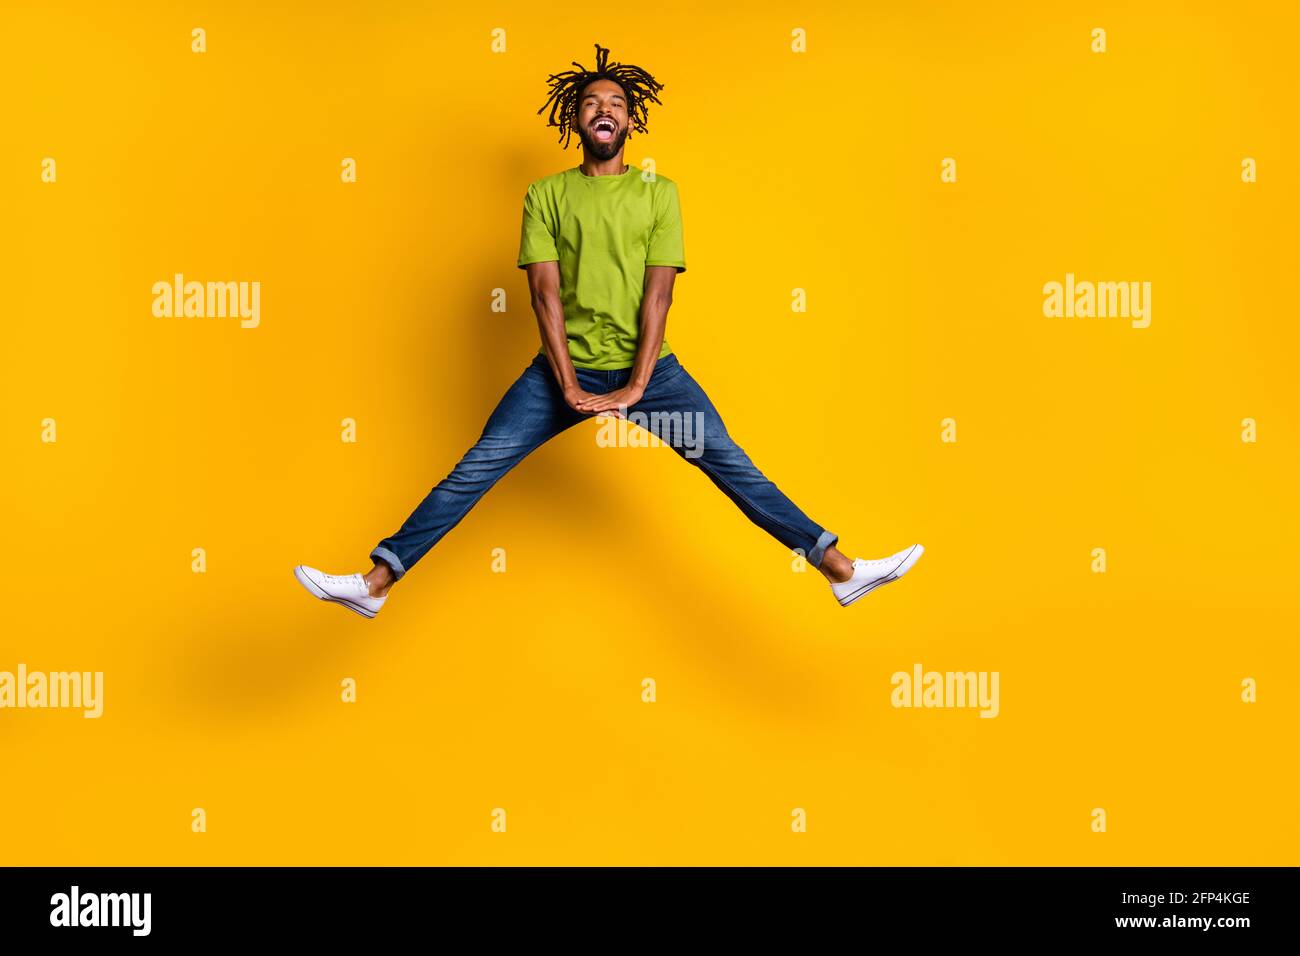 Full length photo portrait of guy jumping up spreading legs isolated on ...